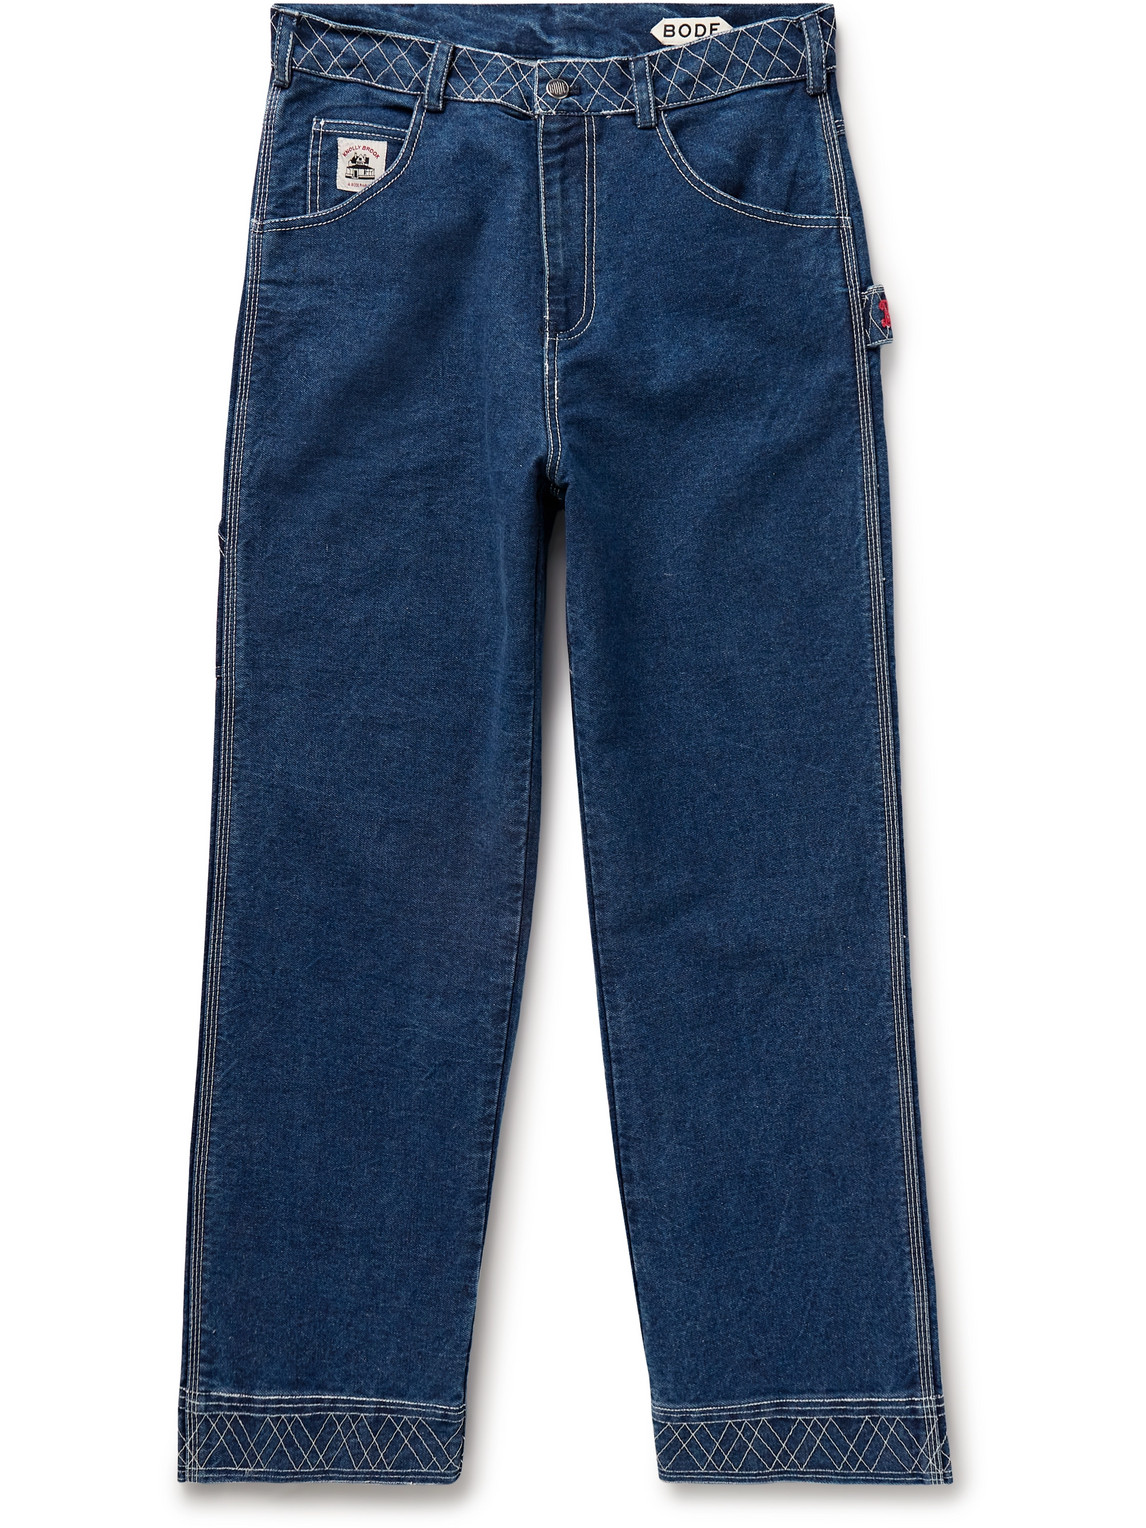 Knolly Brook Straight-Leg Embroidered Jeans